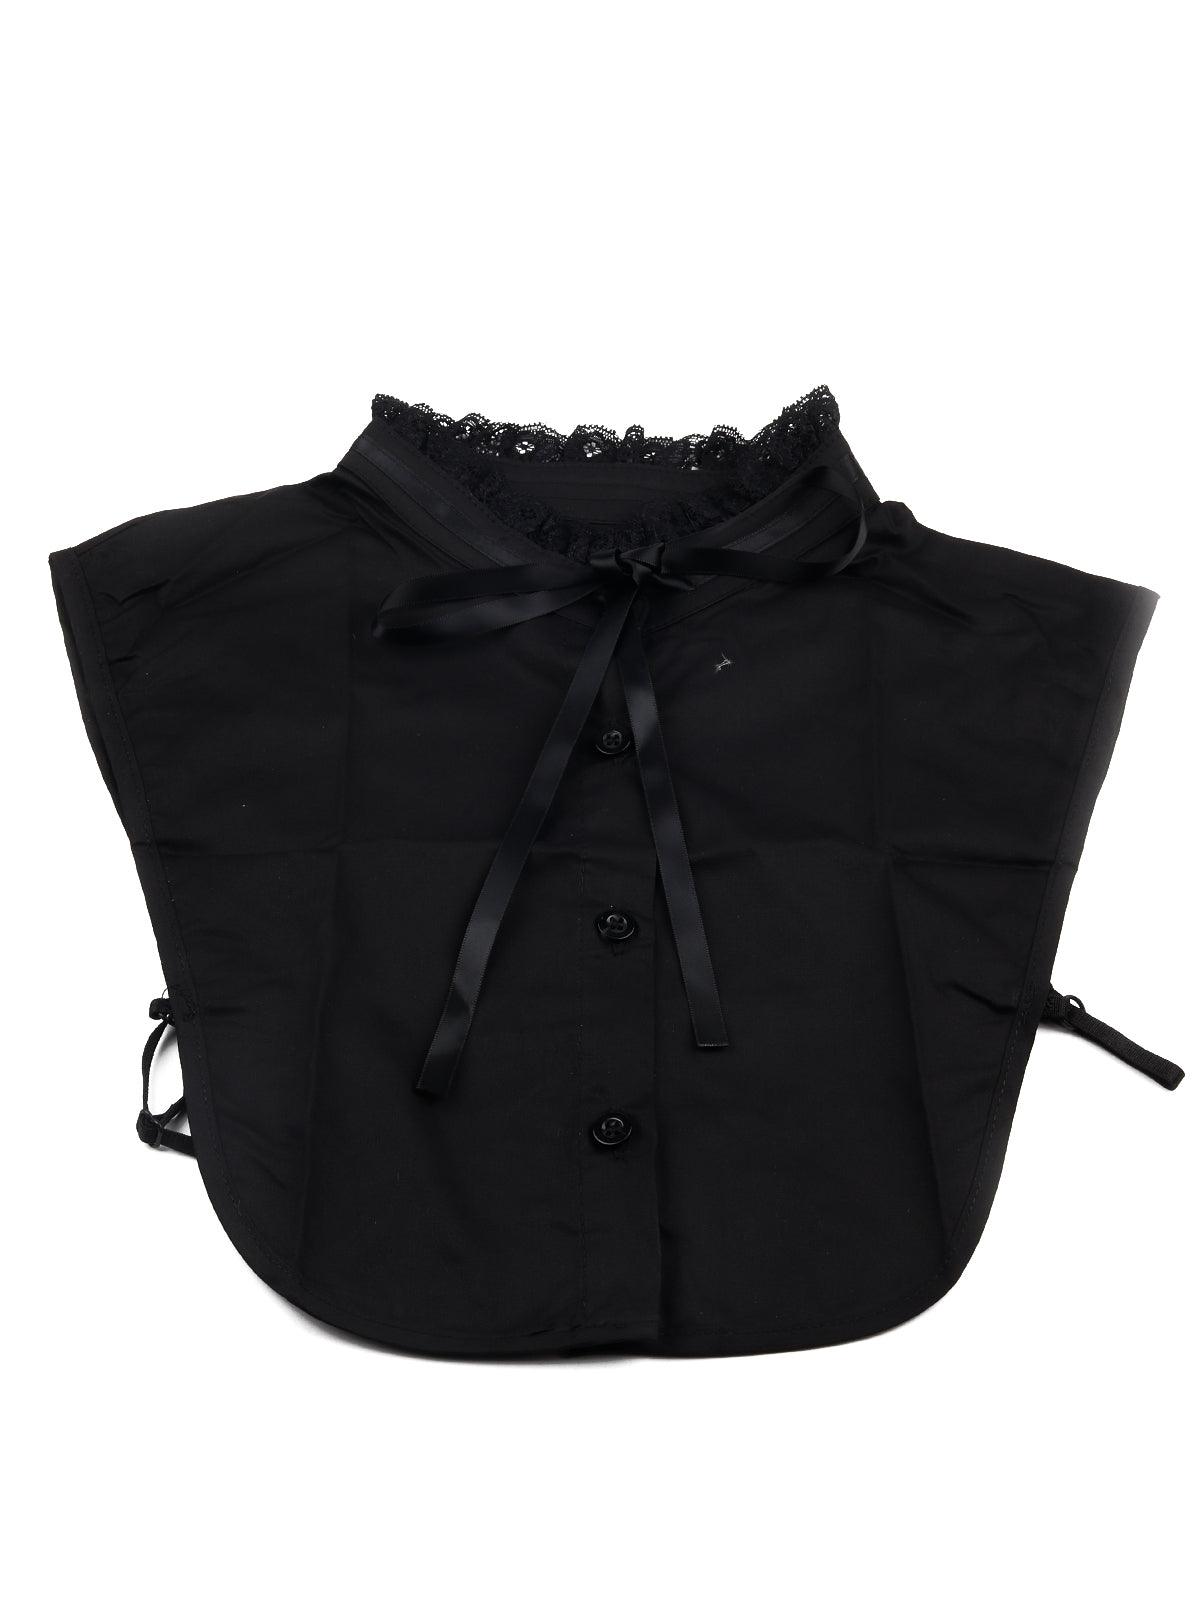 Classic black detachable collar with lace - Odette